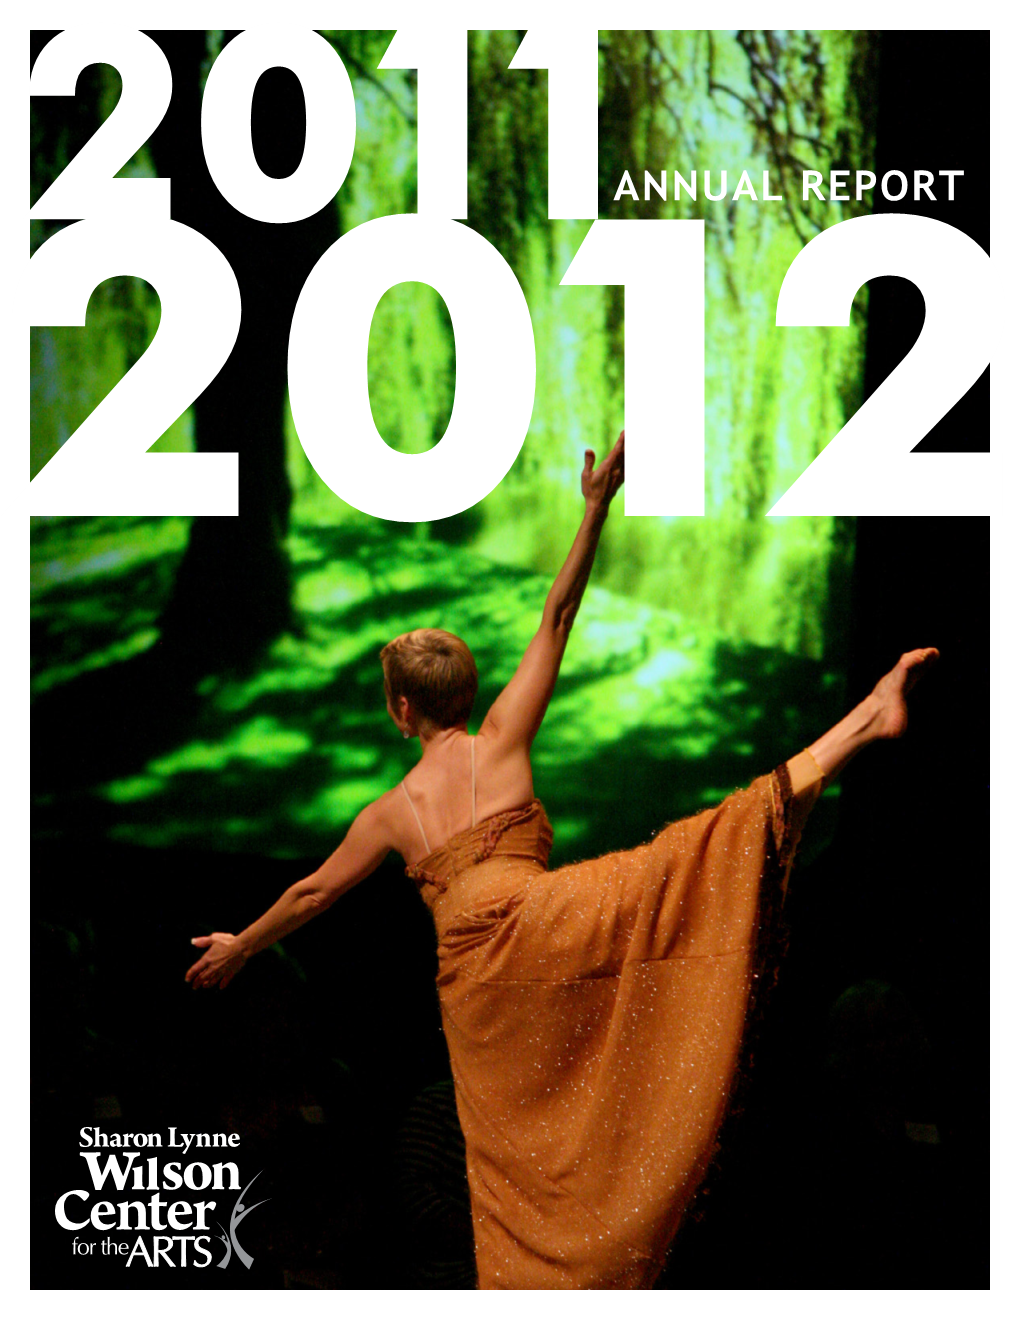 Annual Report to Be the Catalyst for Lifelong Discovery & Exploration of the Arts